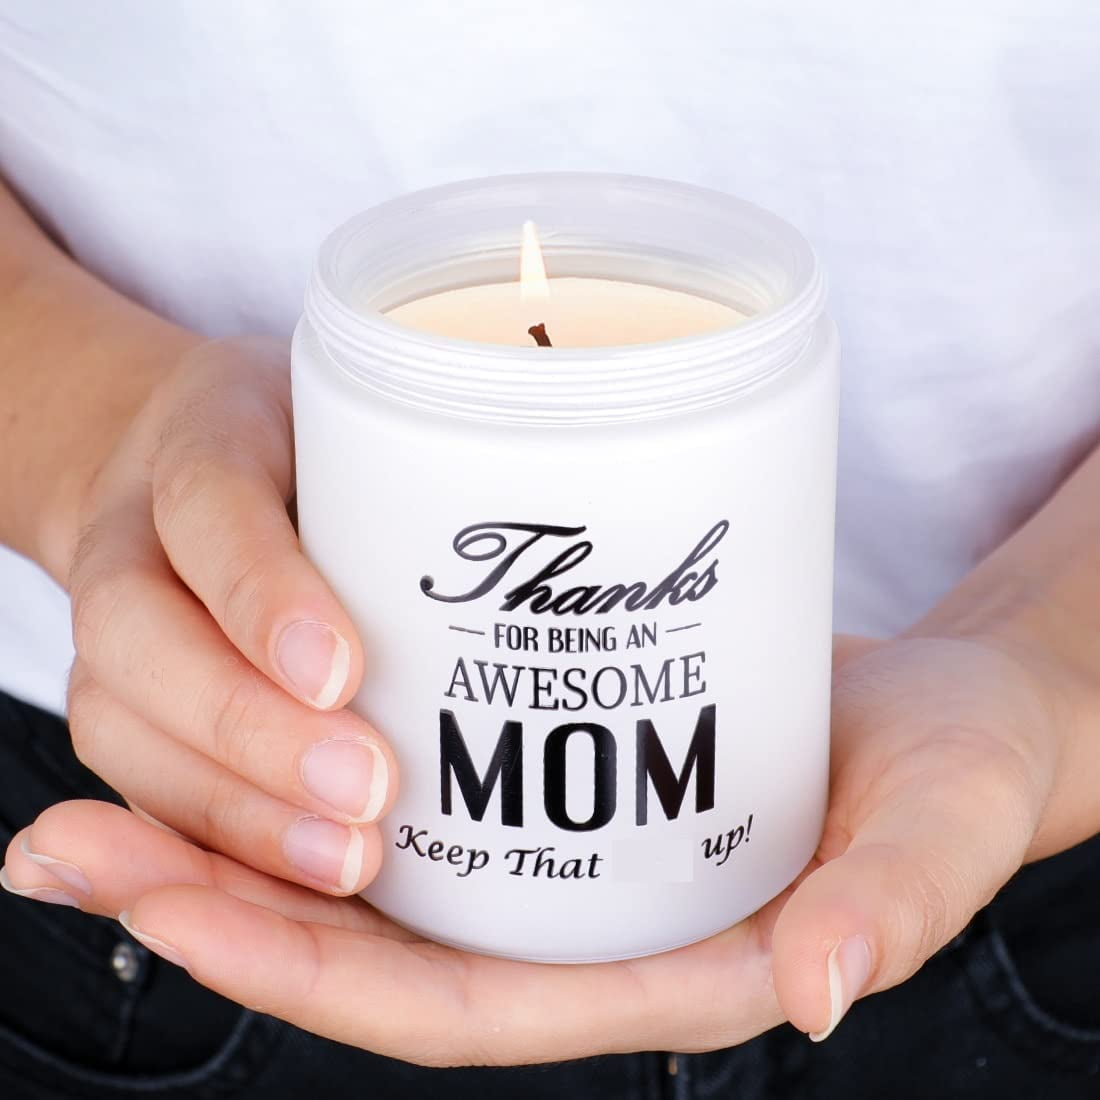 Gifts for Mom from Daughter Son, Handmade Candle Gifts for Mom, Unique  Mother's Day Present, Funny Birthday Gifts for Mom, Mom Gifts,Mothers Day